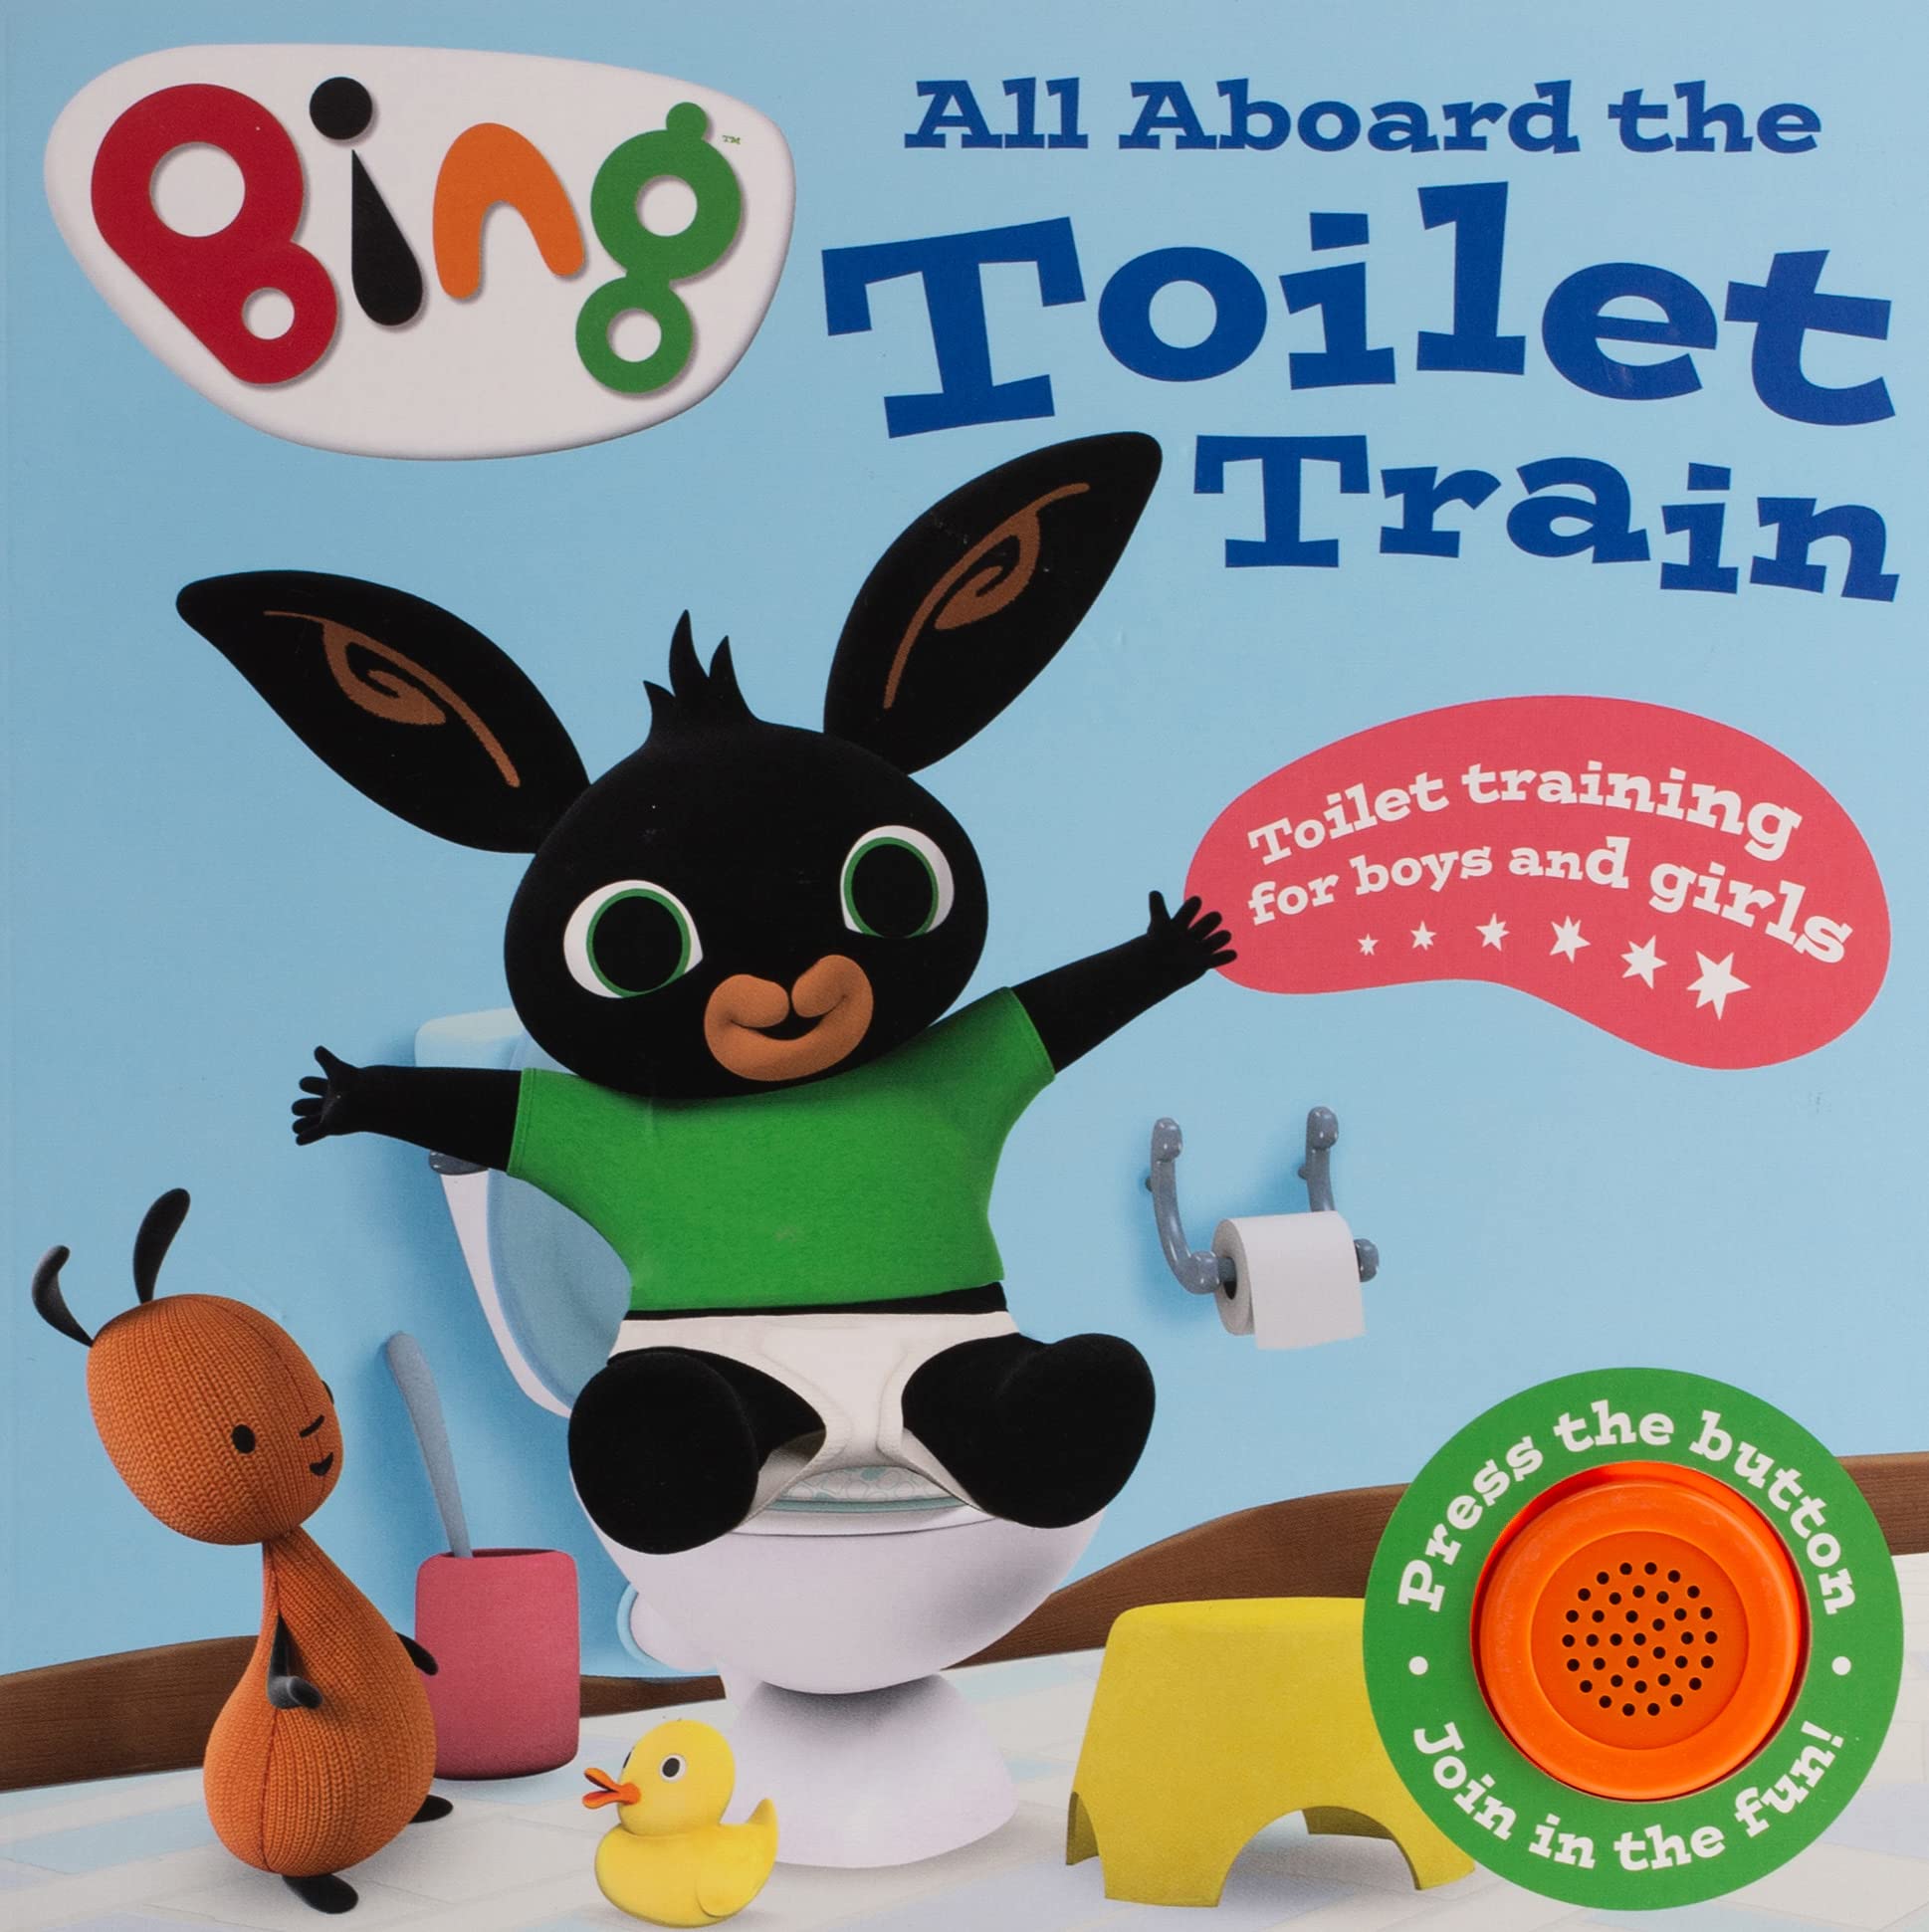 front cover of the book 'all aboard the toilet train', a potty training book for toddlers